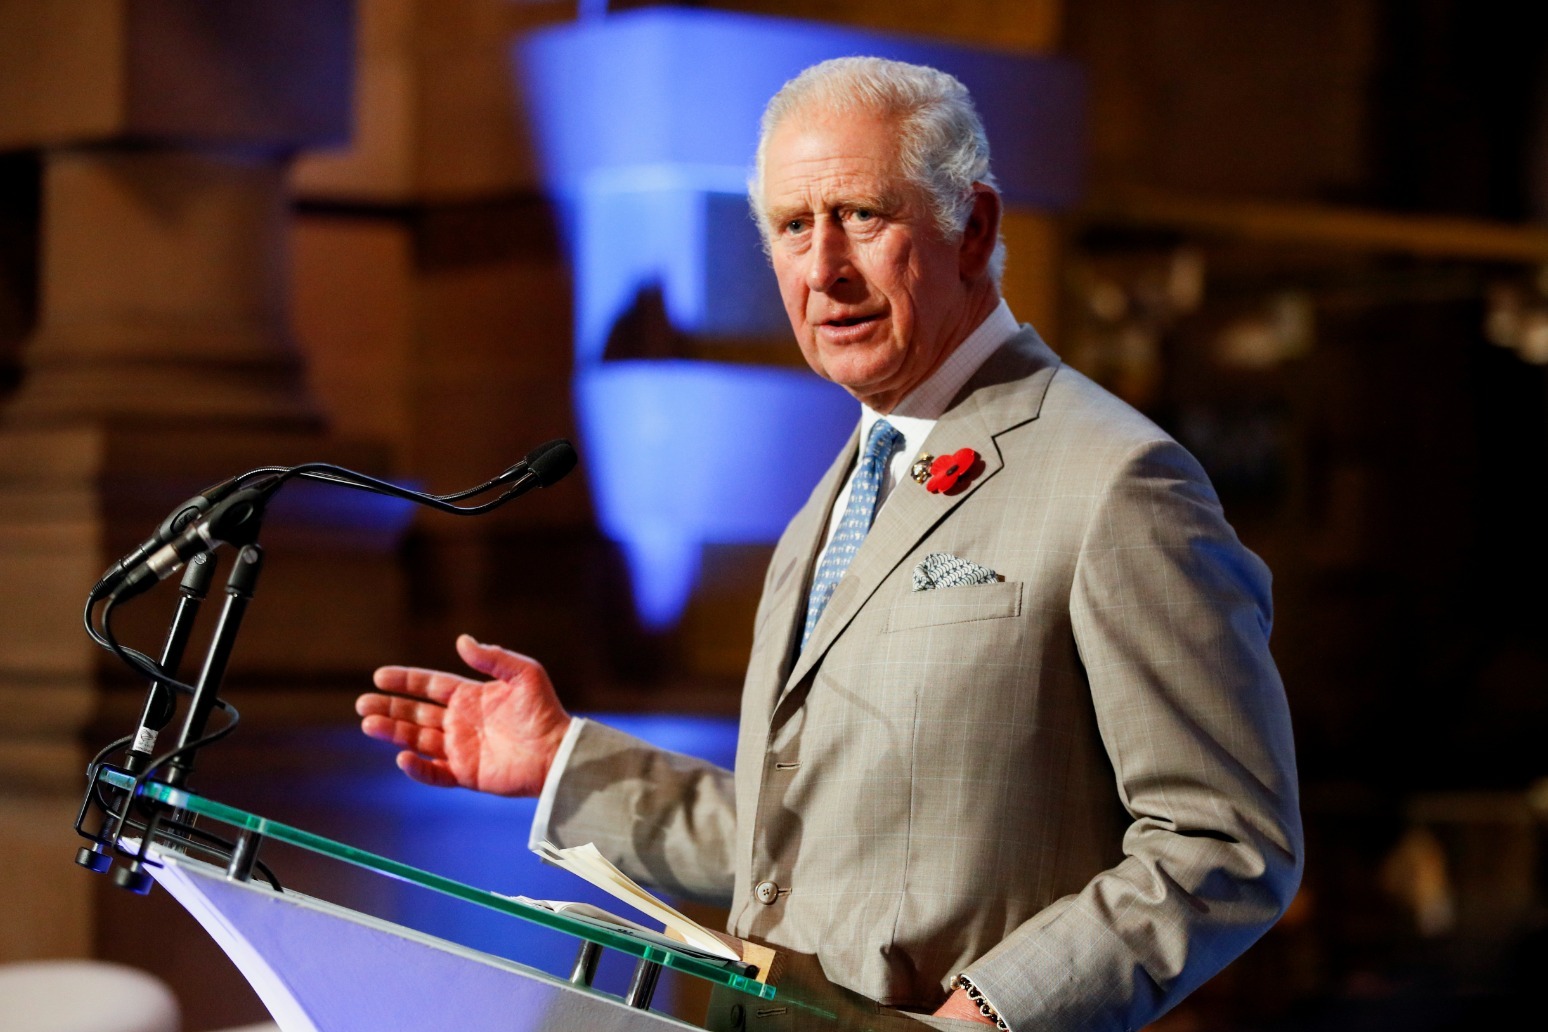 Charles announces forum seeking to build a sustainable future 